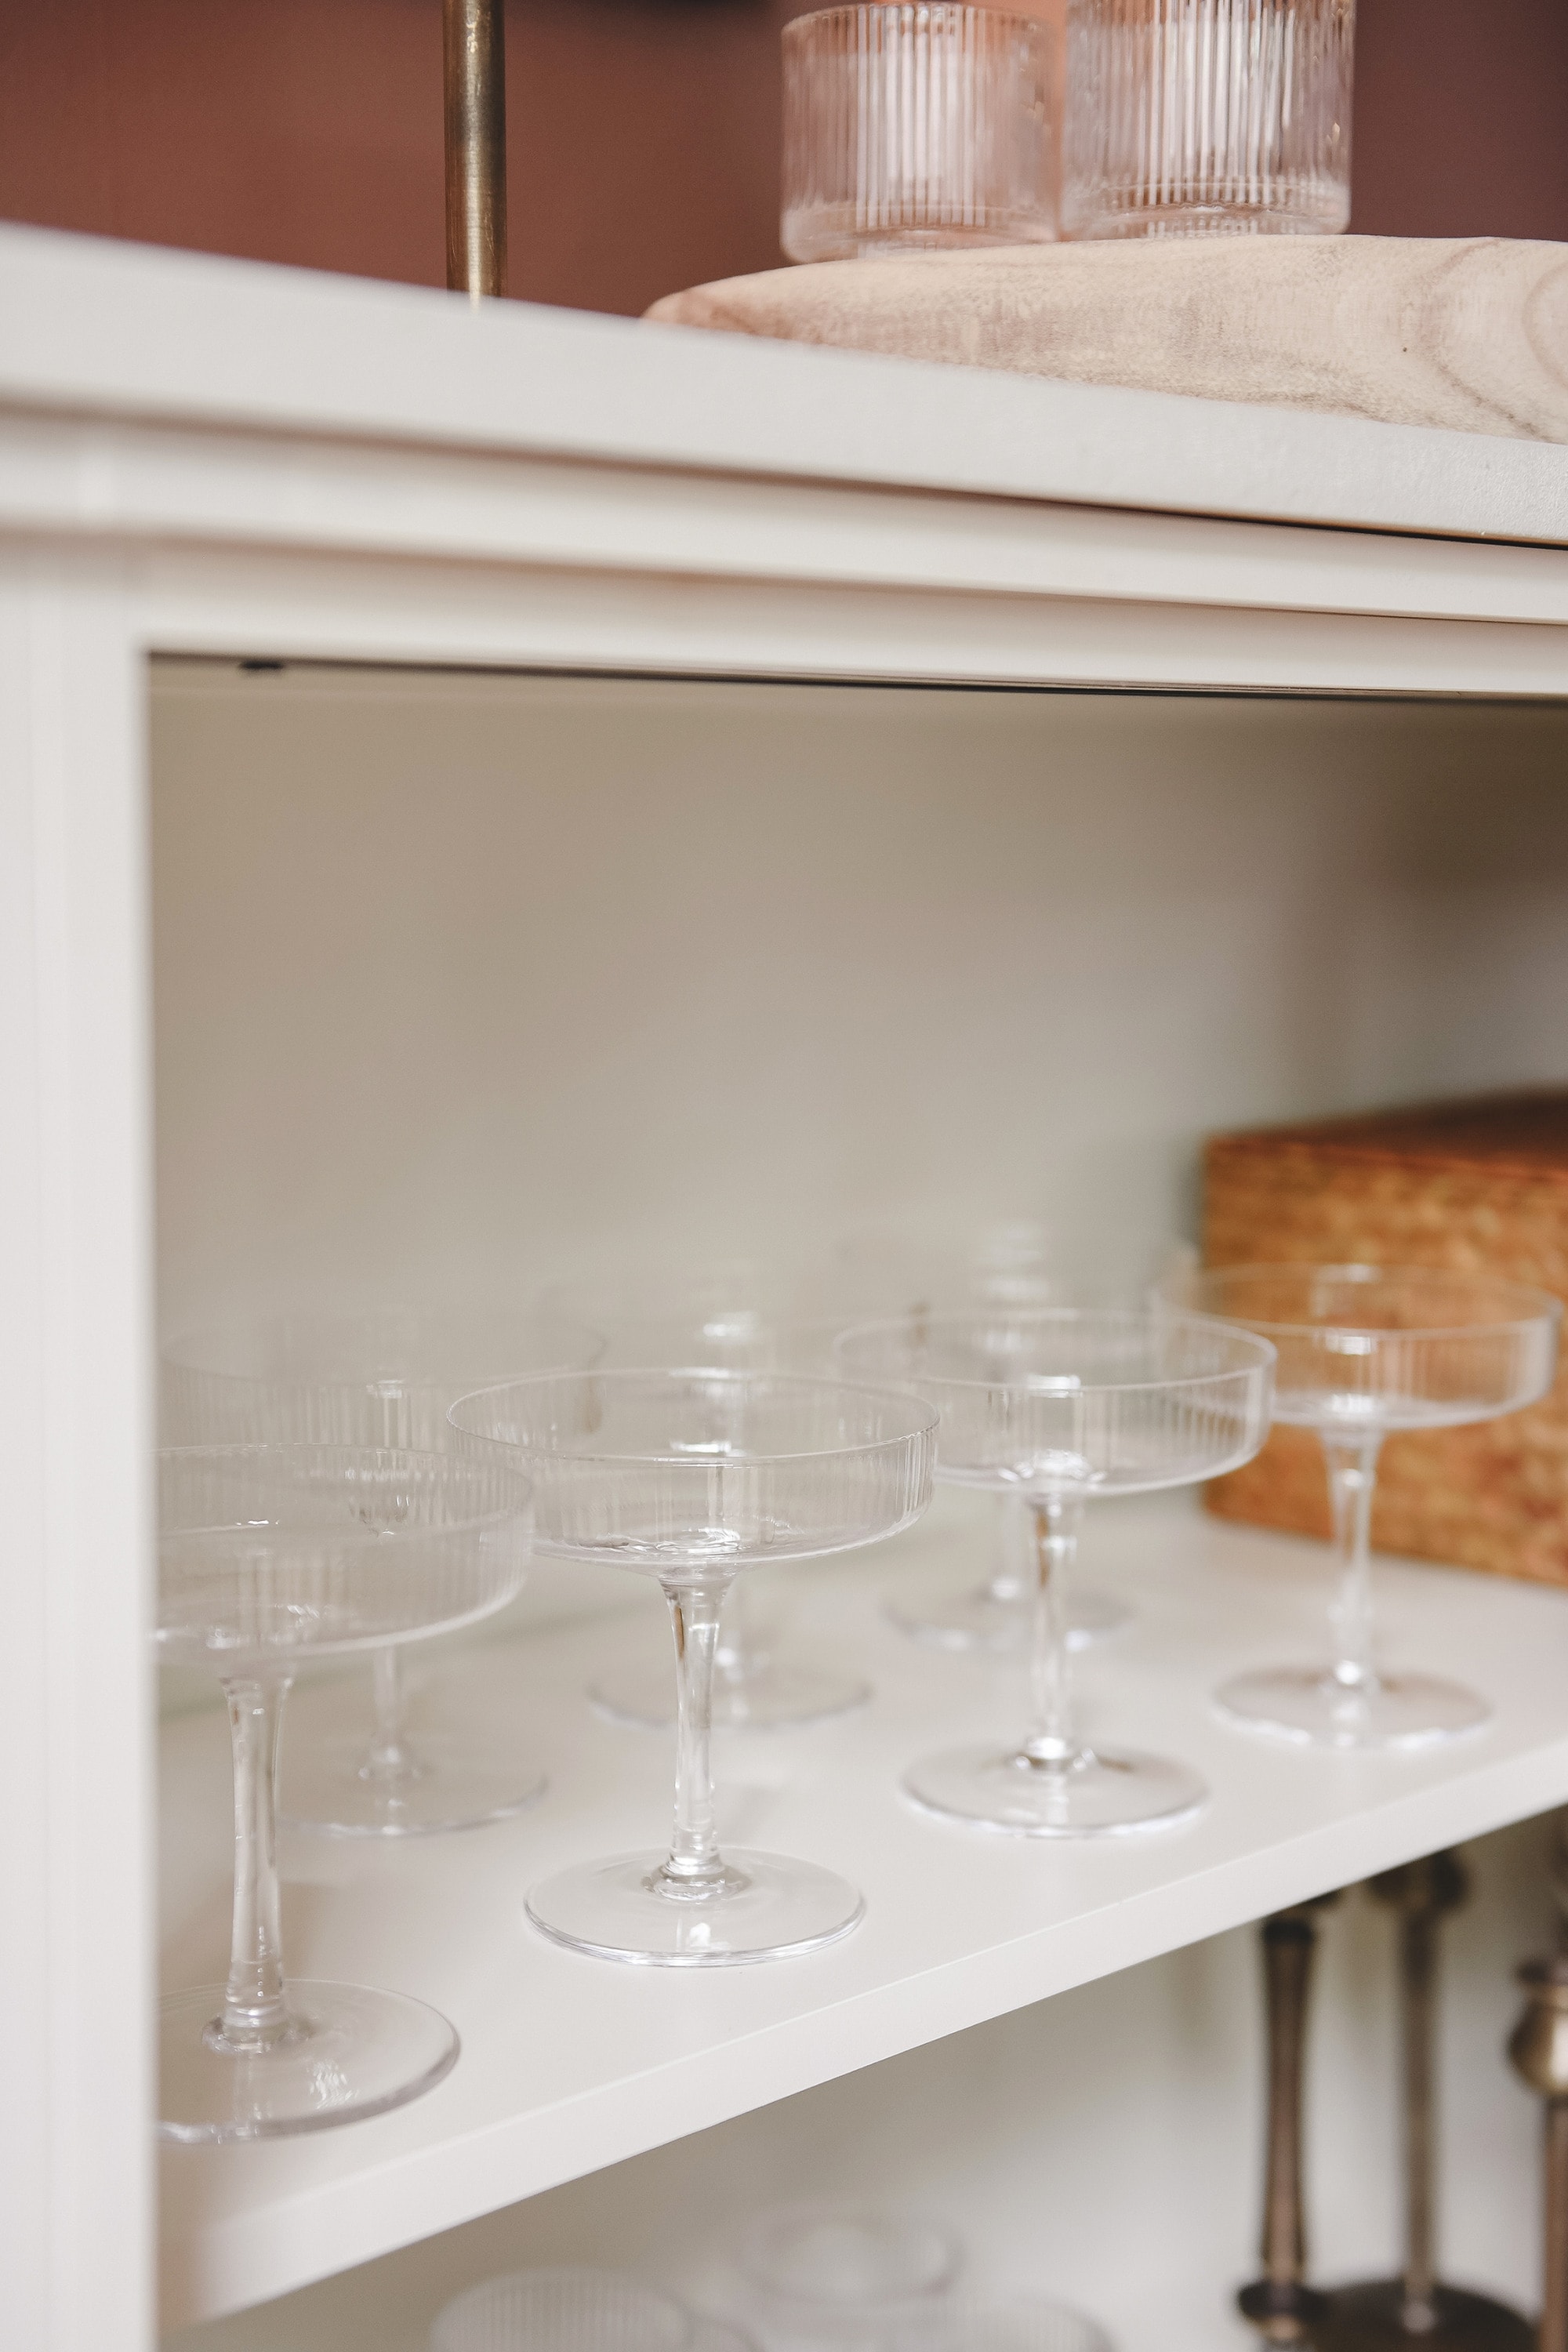 Glassware in a dining room sideboard